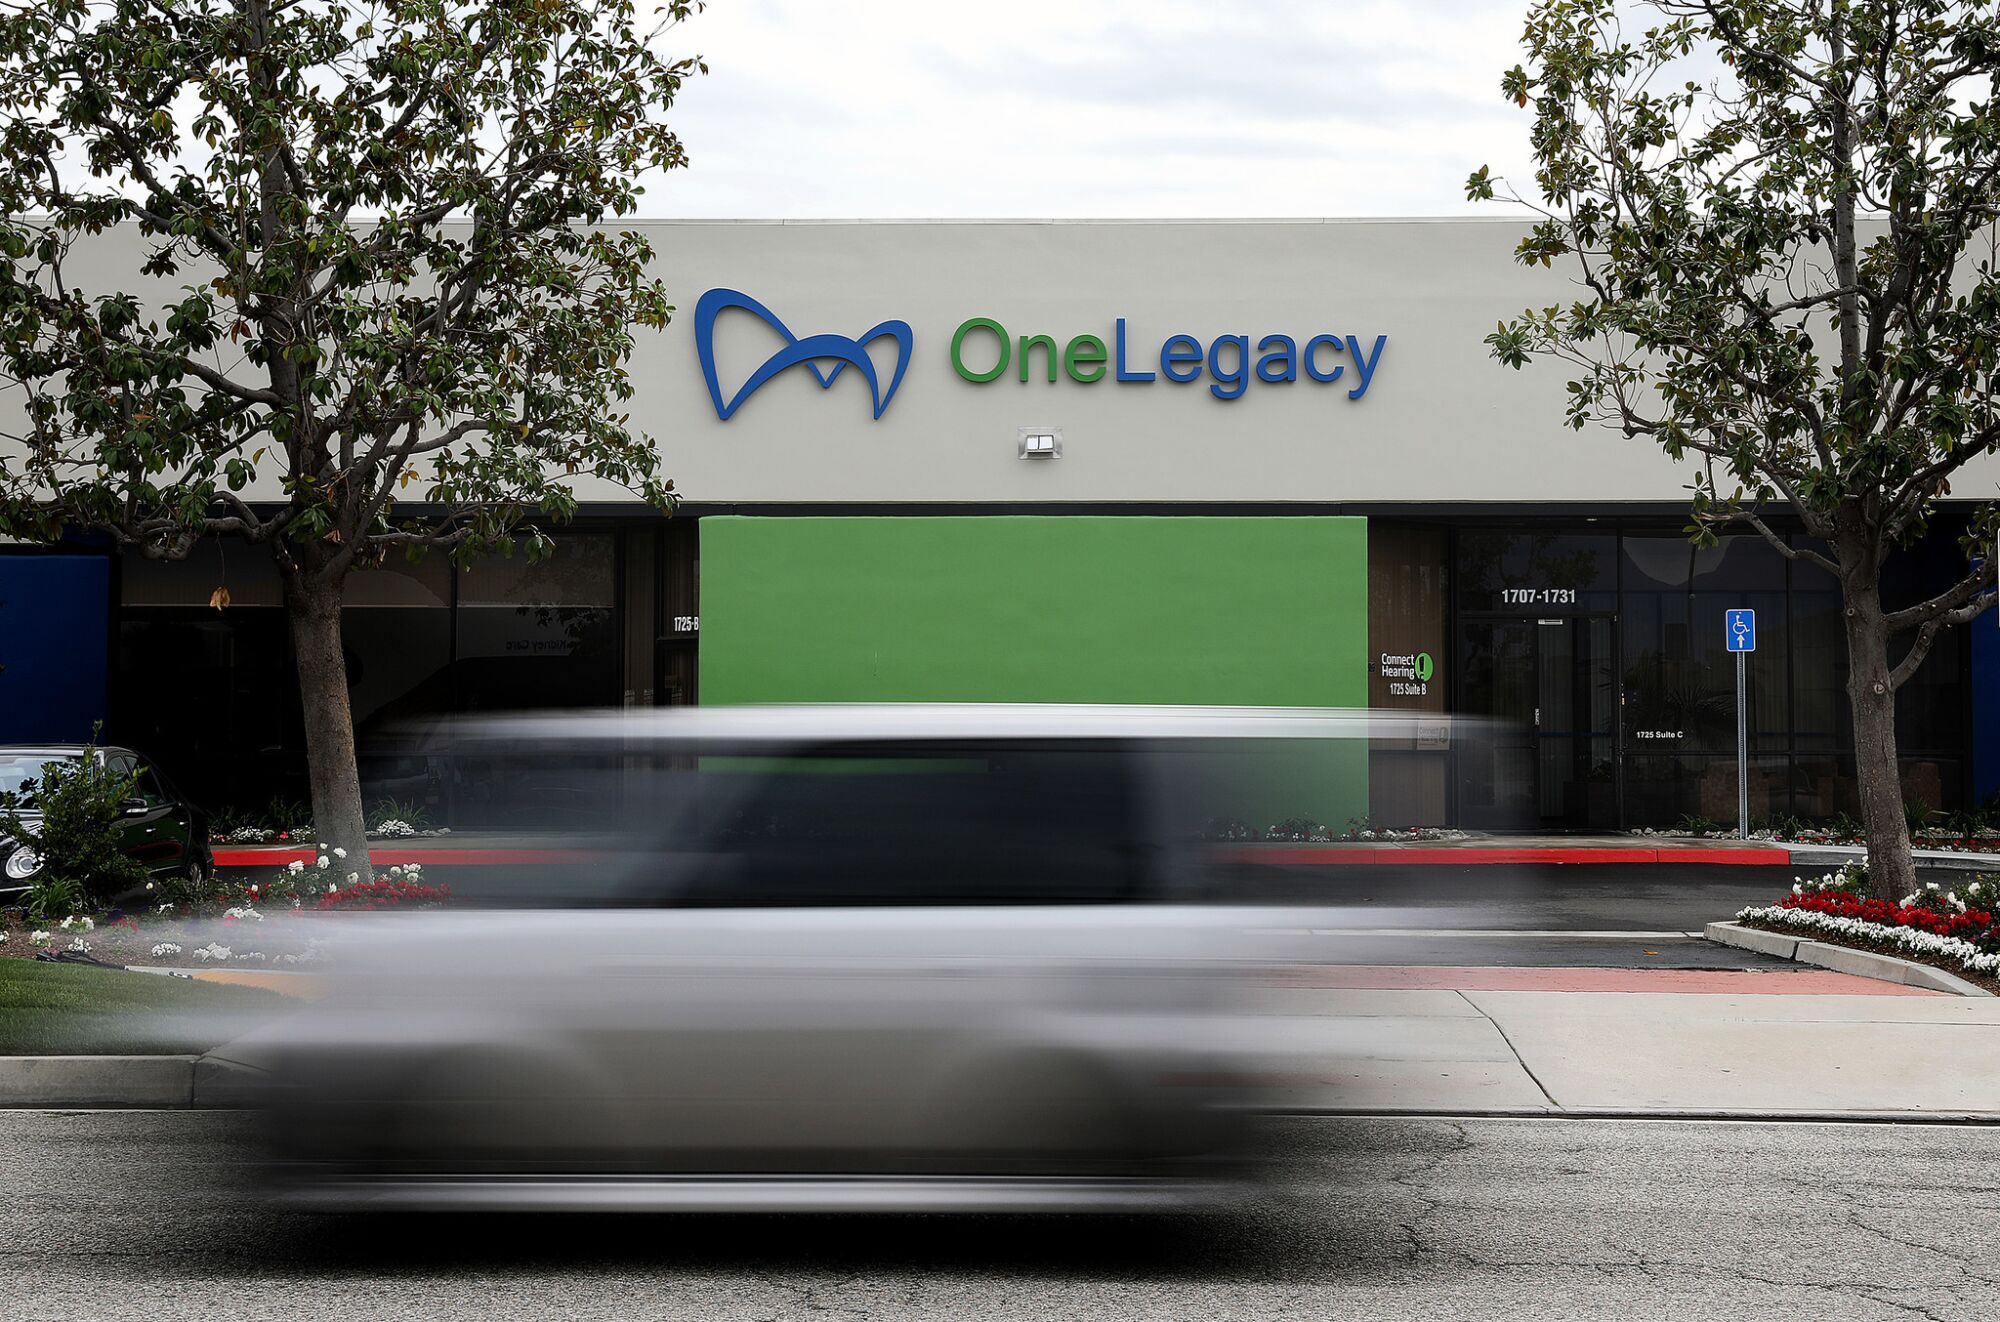 OneLegacy's transplant recovery center in Redlands